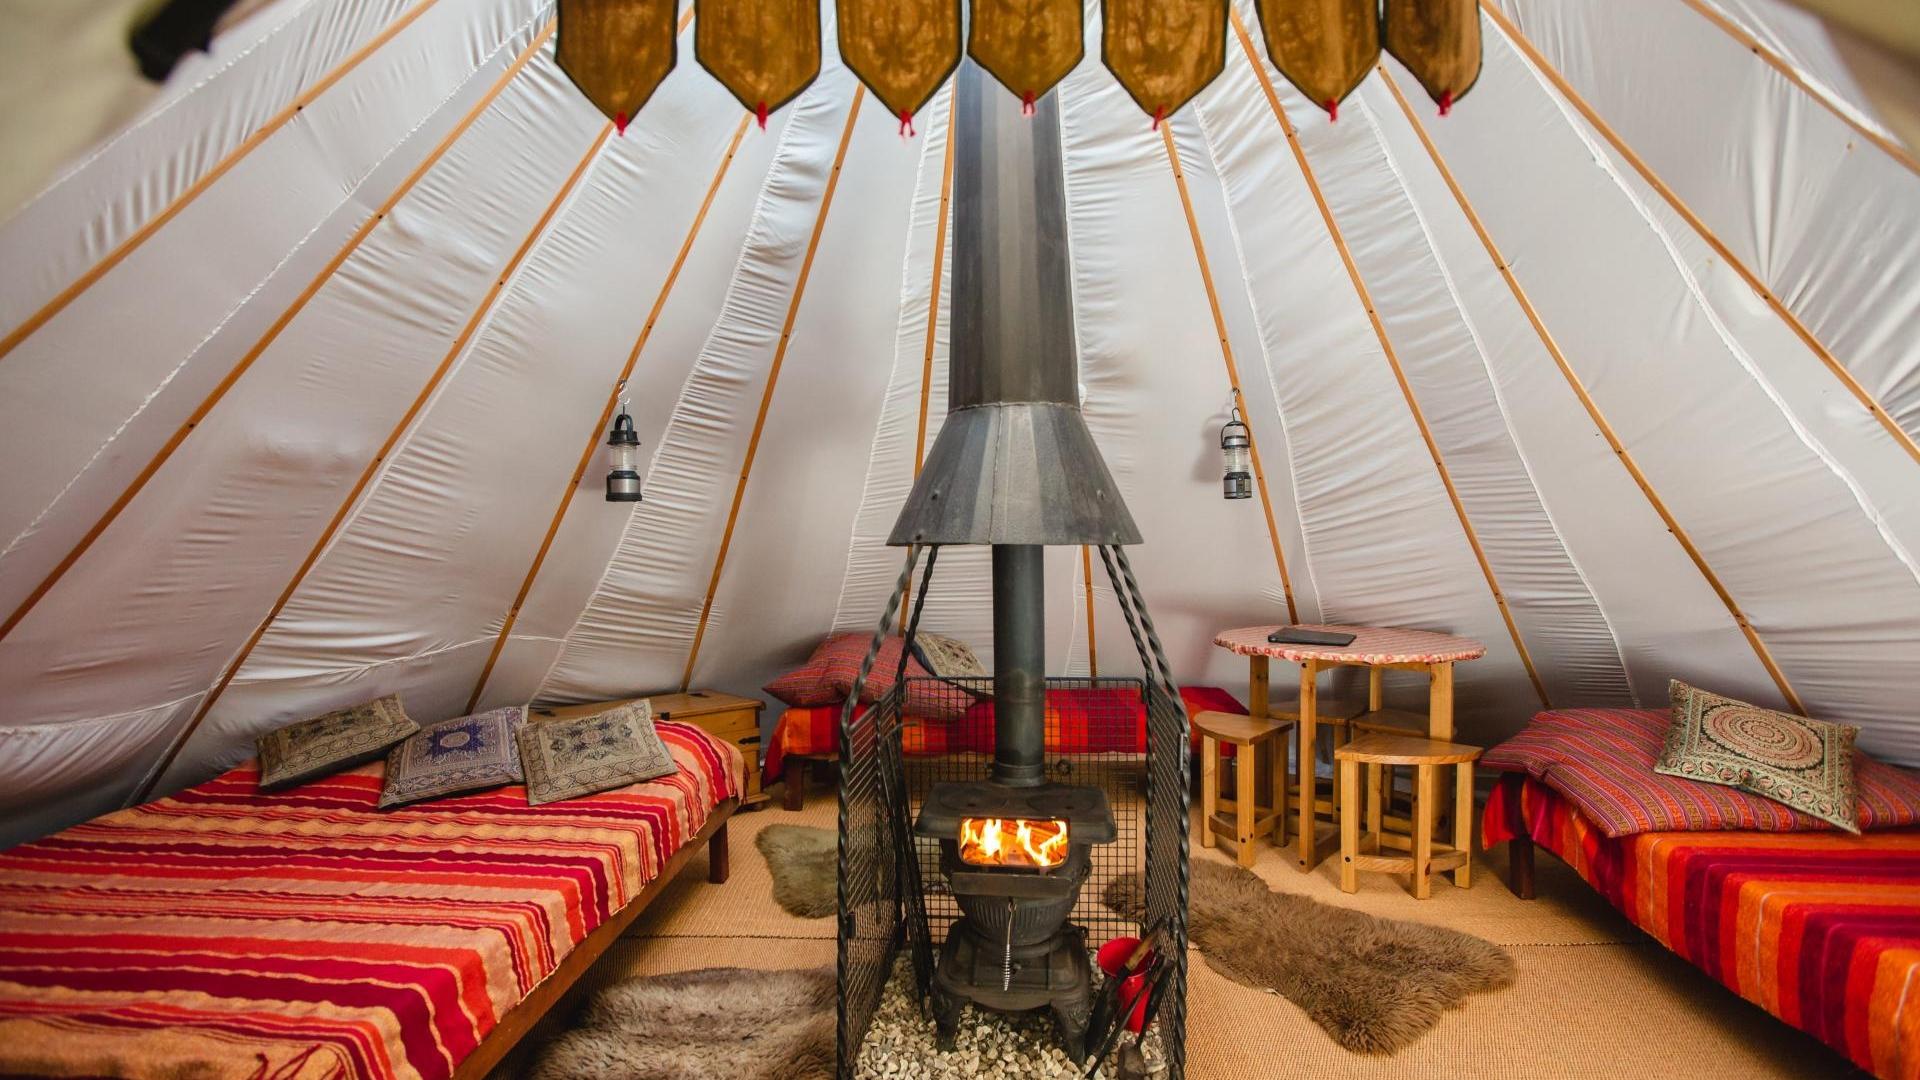 1 Bedroom Glamping/Tipi in Wales, United Kingdom